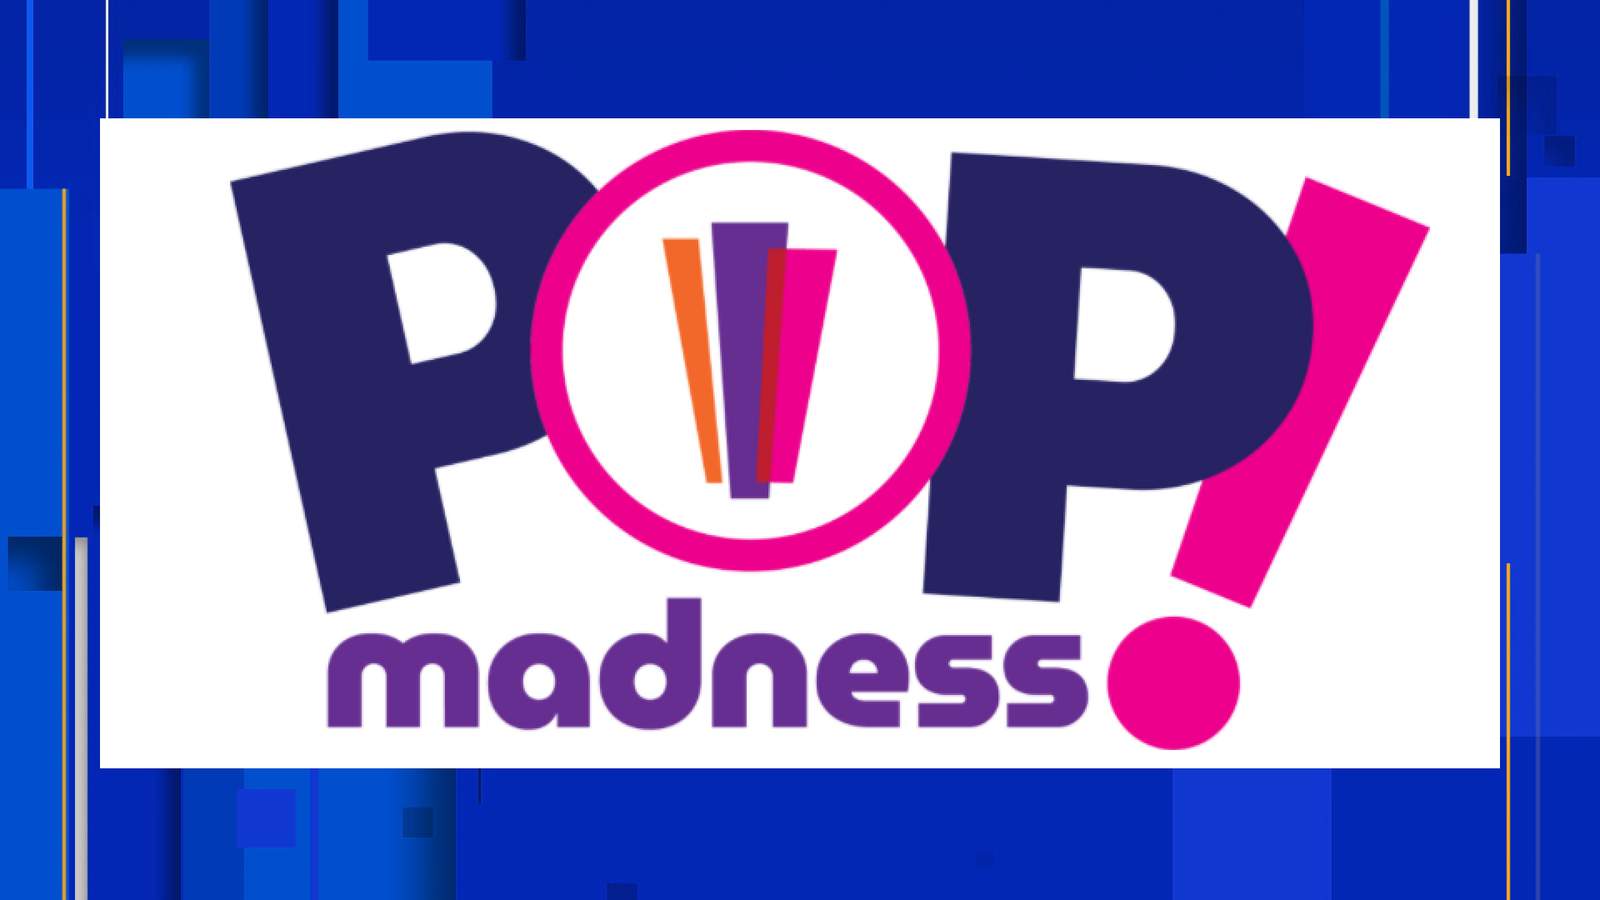 San Antonio Public Library hosts virtual ‘Pop Madness’ event for all ages